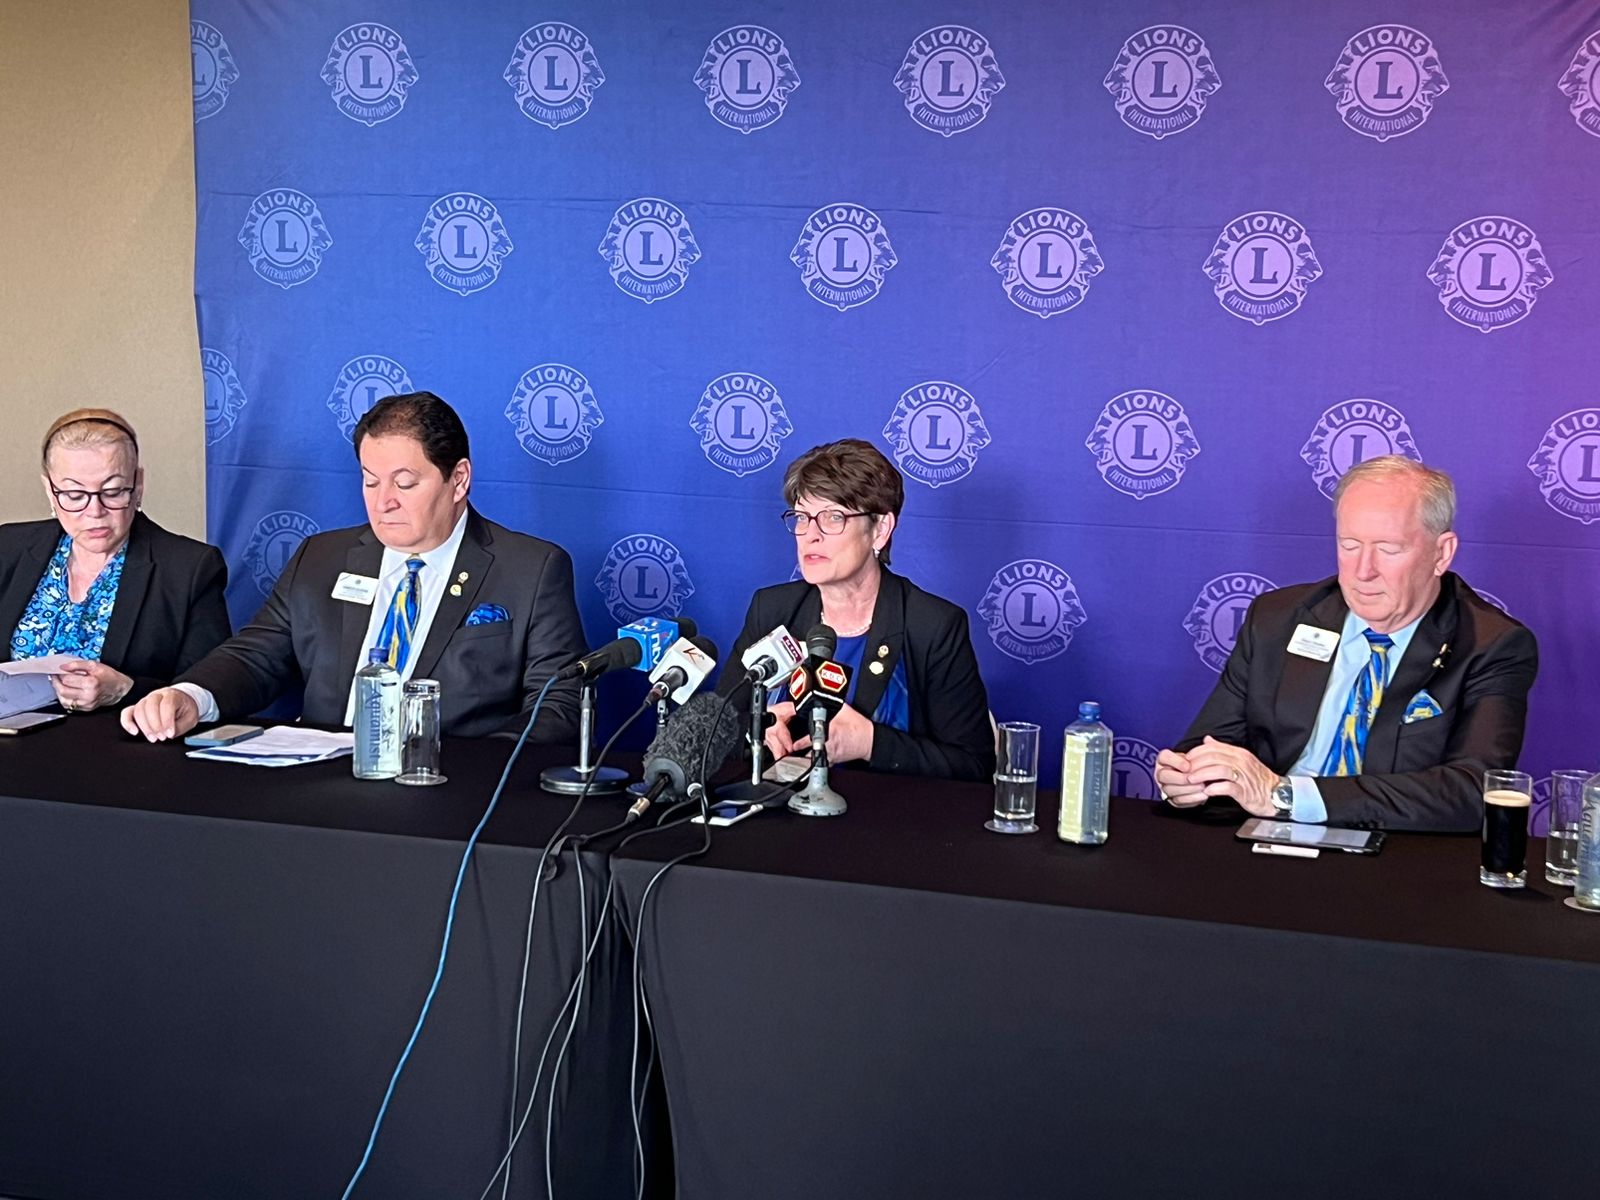 File image of the Lions International President Dr. Patti Hill adresssing the media.